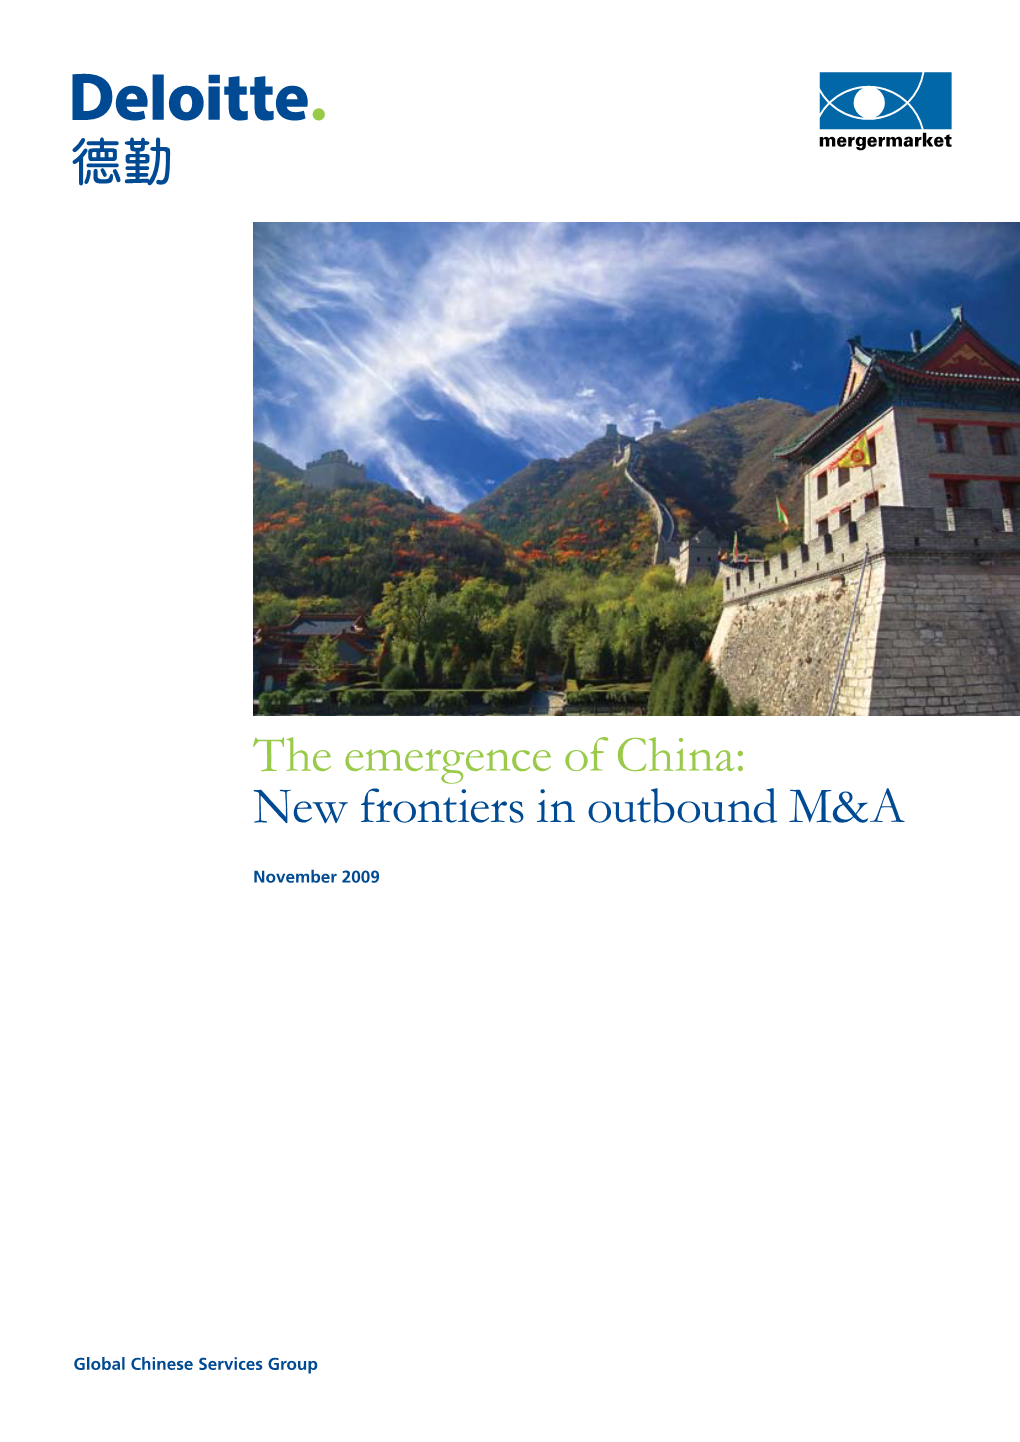 The Emergence of China: New Frontiers in Outbound M&A